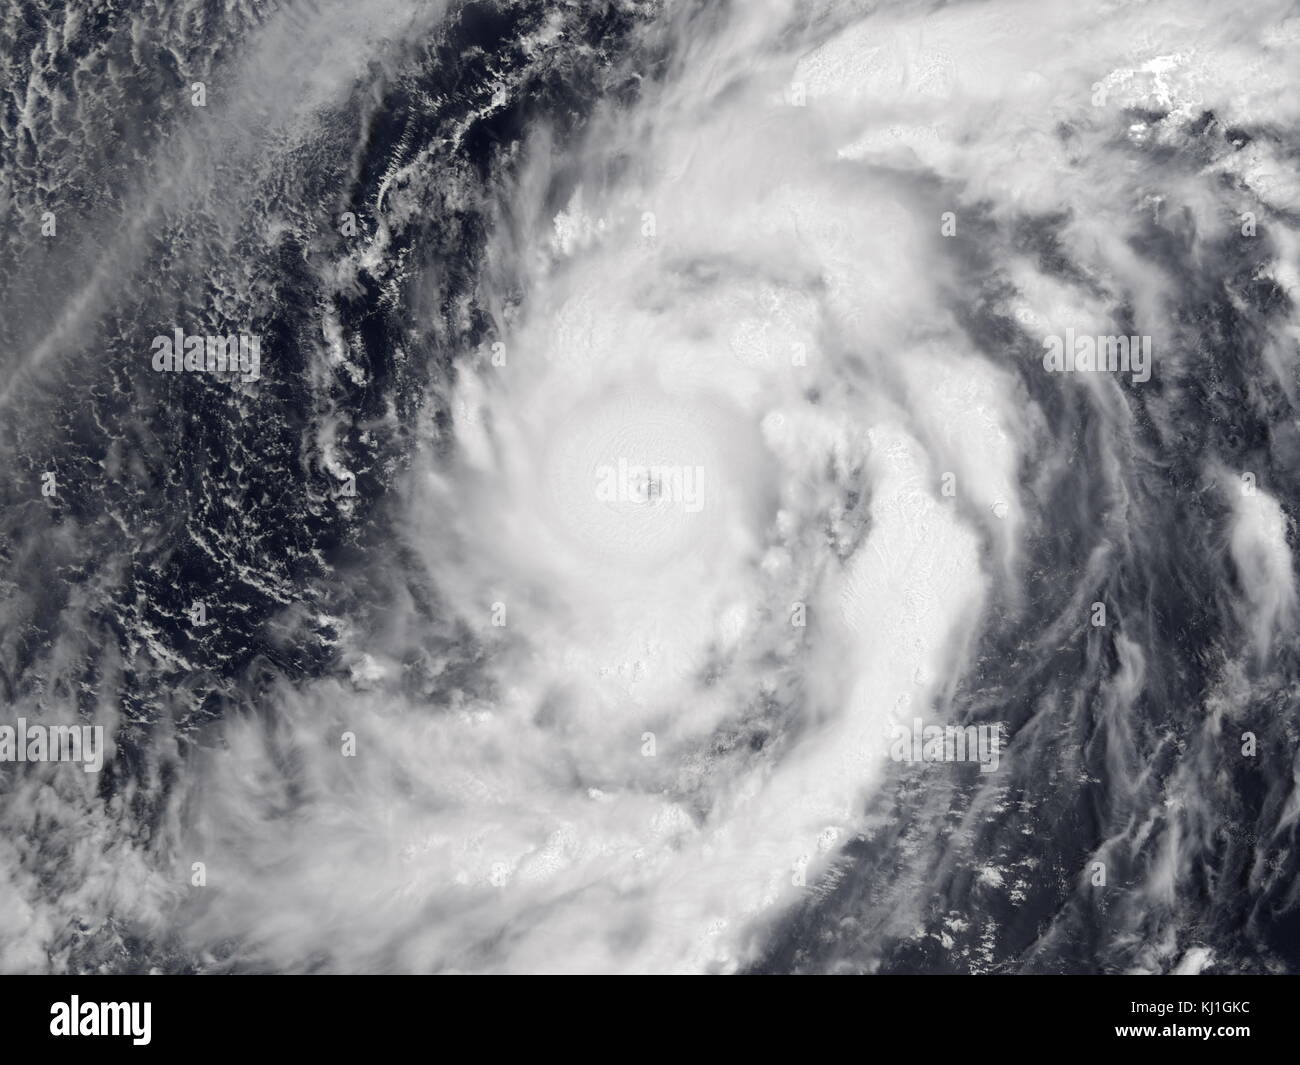 Typhoon Damrey was a Category 5, super typhoon on 9th may 2000. It was the first storm of the Pacific Ocean area typhoon season. Damrey was the strongest May typhoon since Typhoon Phyllis in 1958. Stock Photo